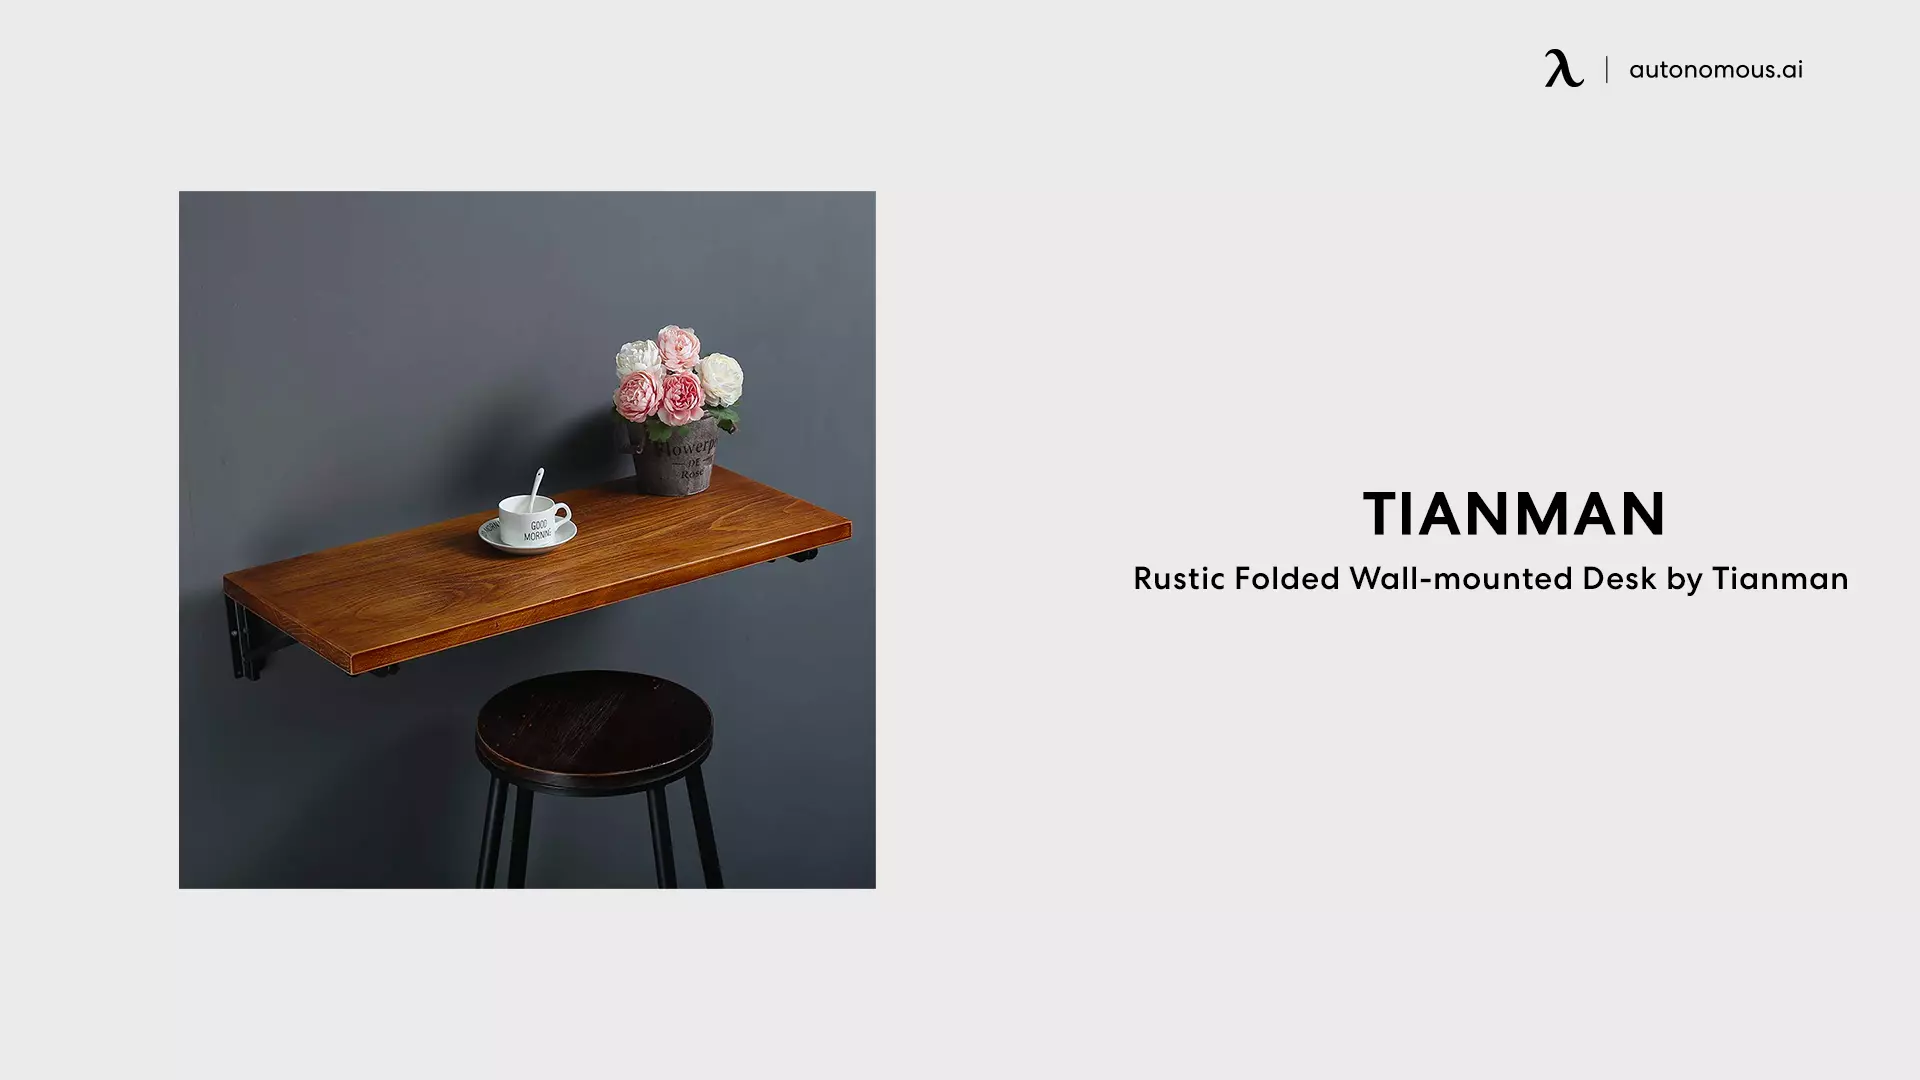 Rustic Folded Wall-mounted Desk by Tianman